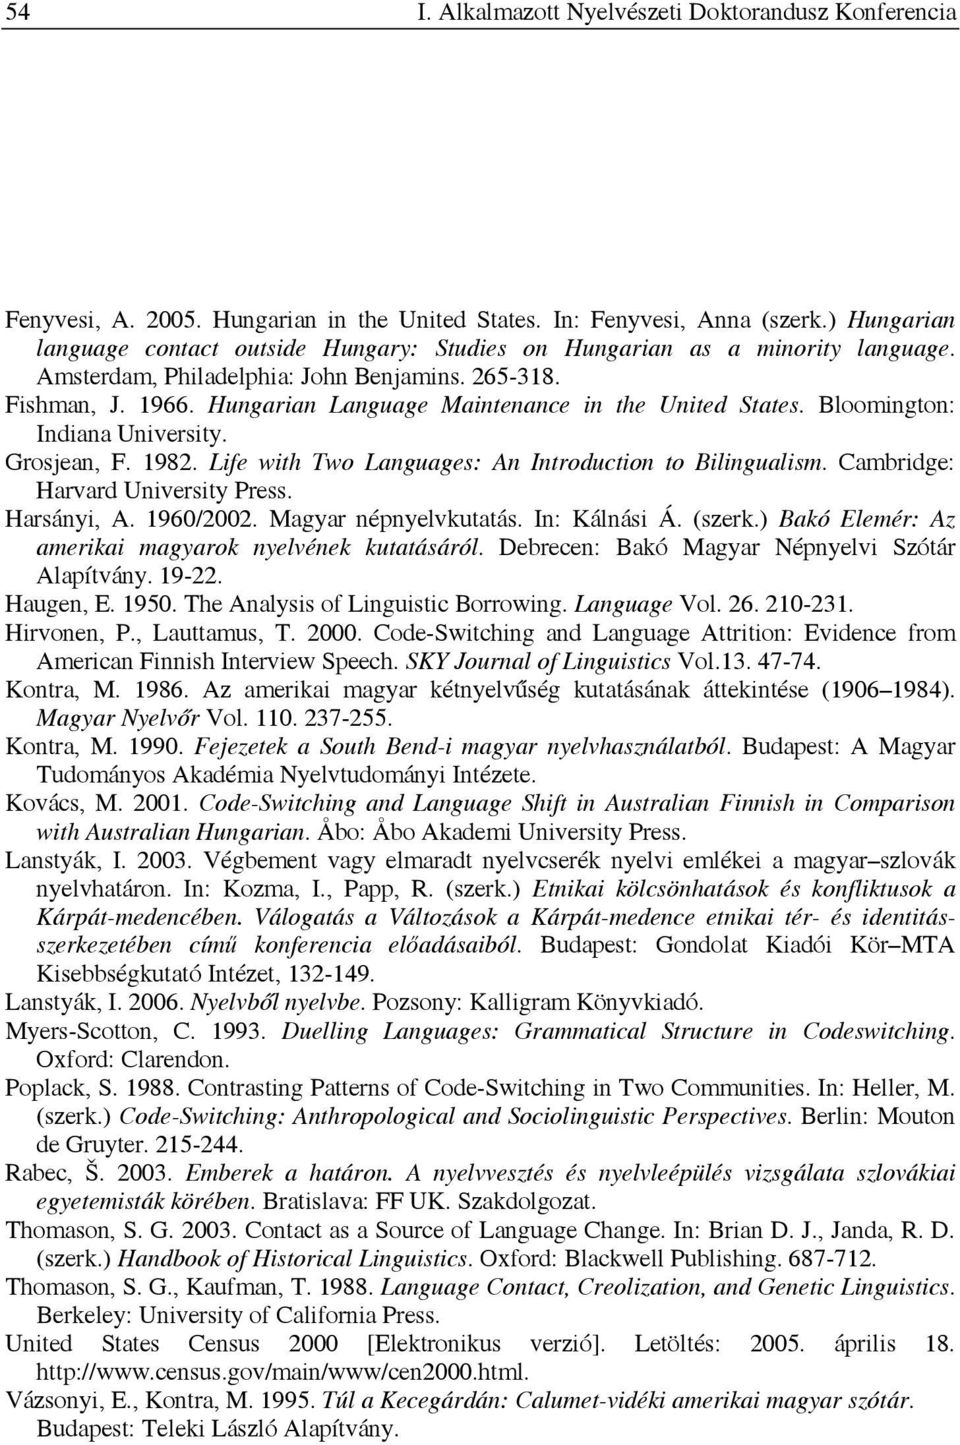 Hungarian Language Maintenance in the United States. Bloomington: Indiana University. Grosjean, F. 1982. Life with Two Languages: An Introduction to Bilingualism. Cambridge: Harvard University Press.